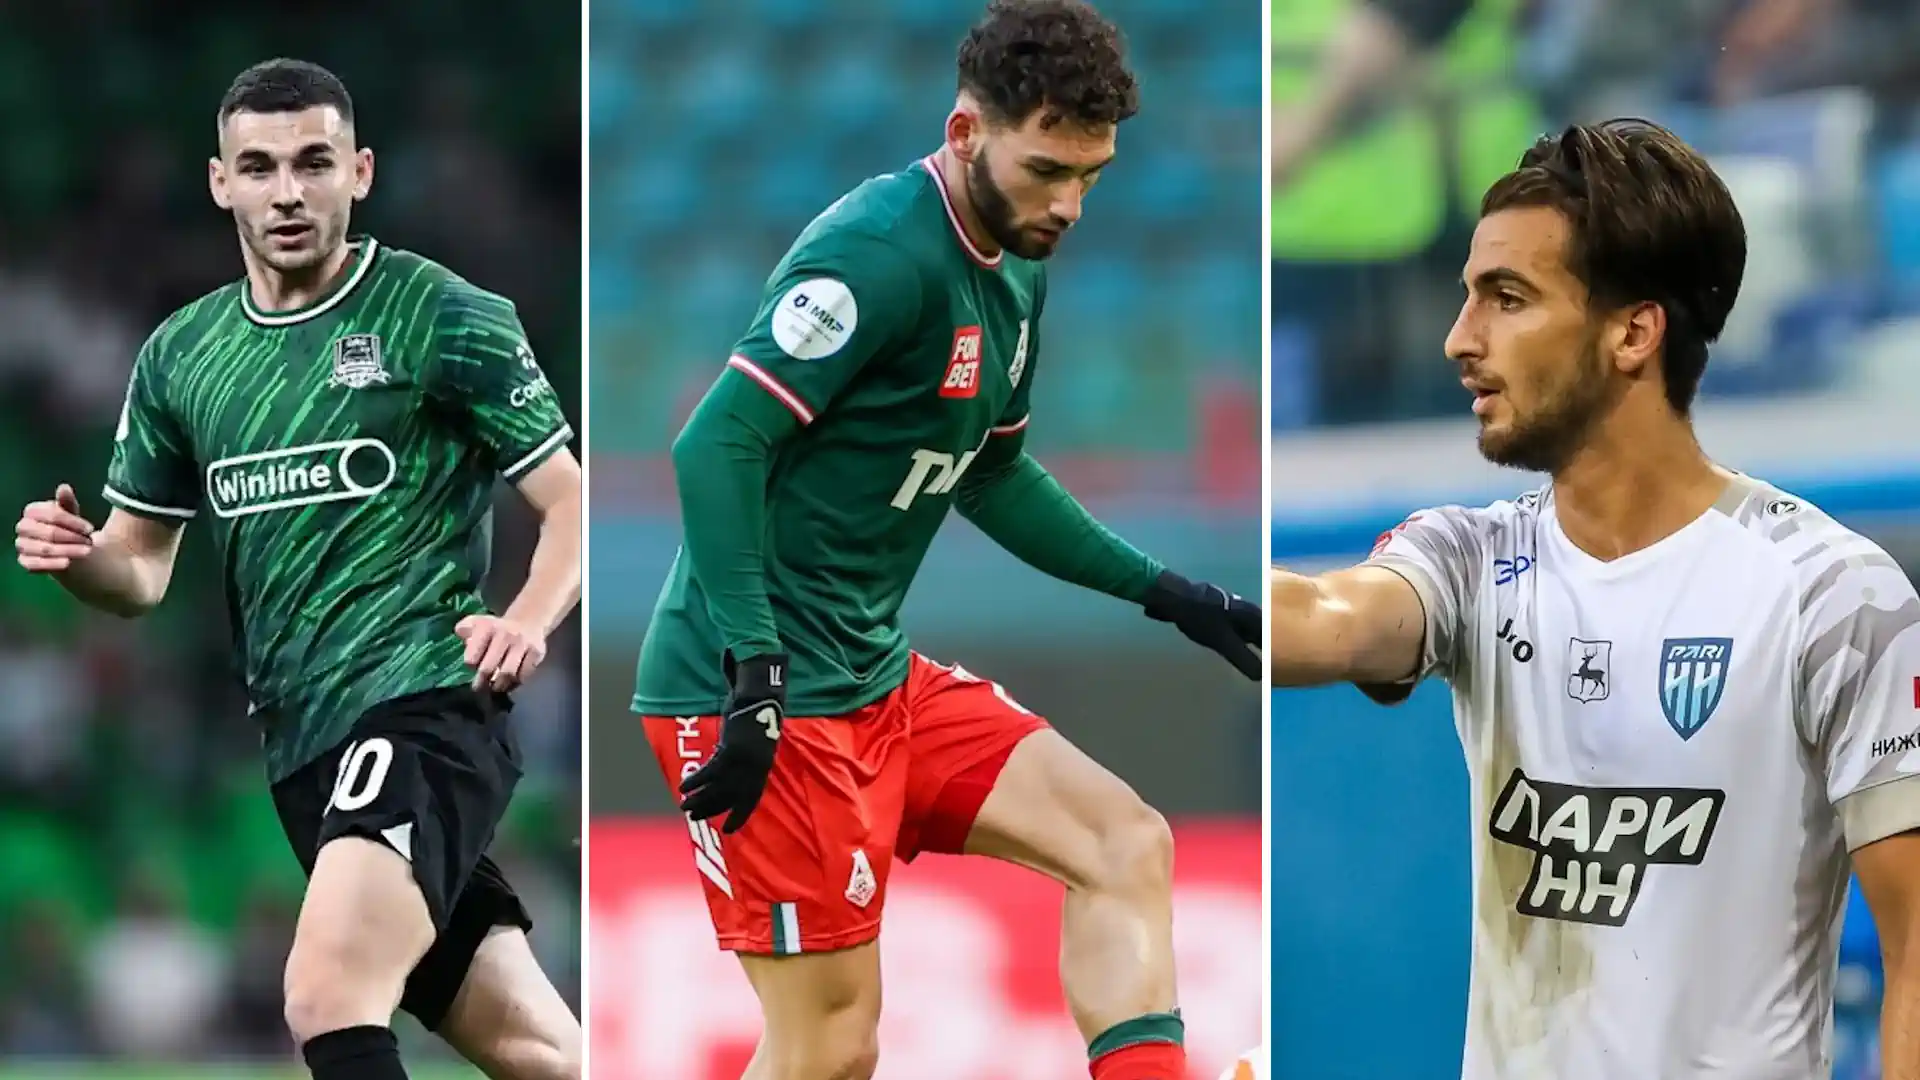 Spertsyan, Tiknizyan and Sevikyan in the second round of voting for the best RPL player